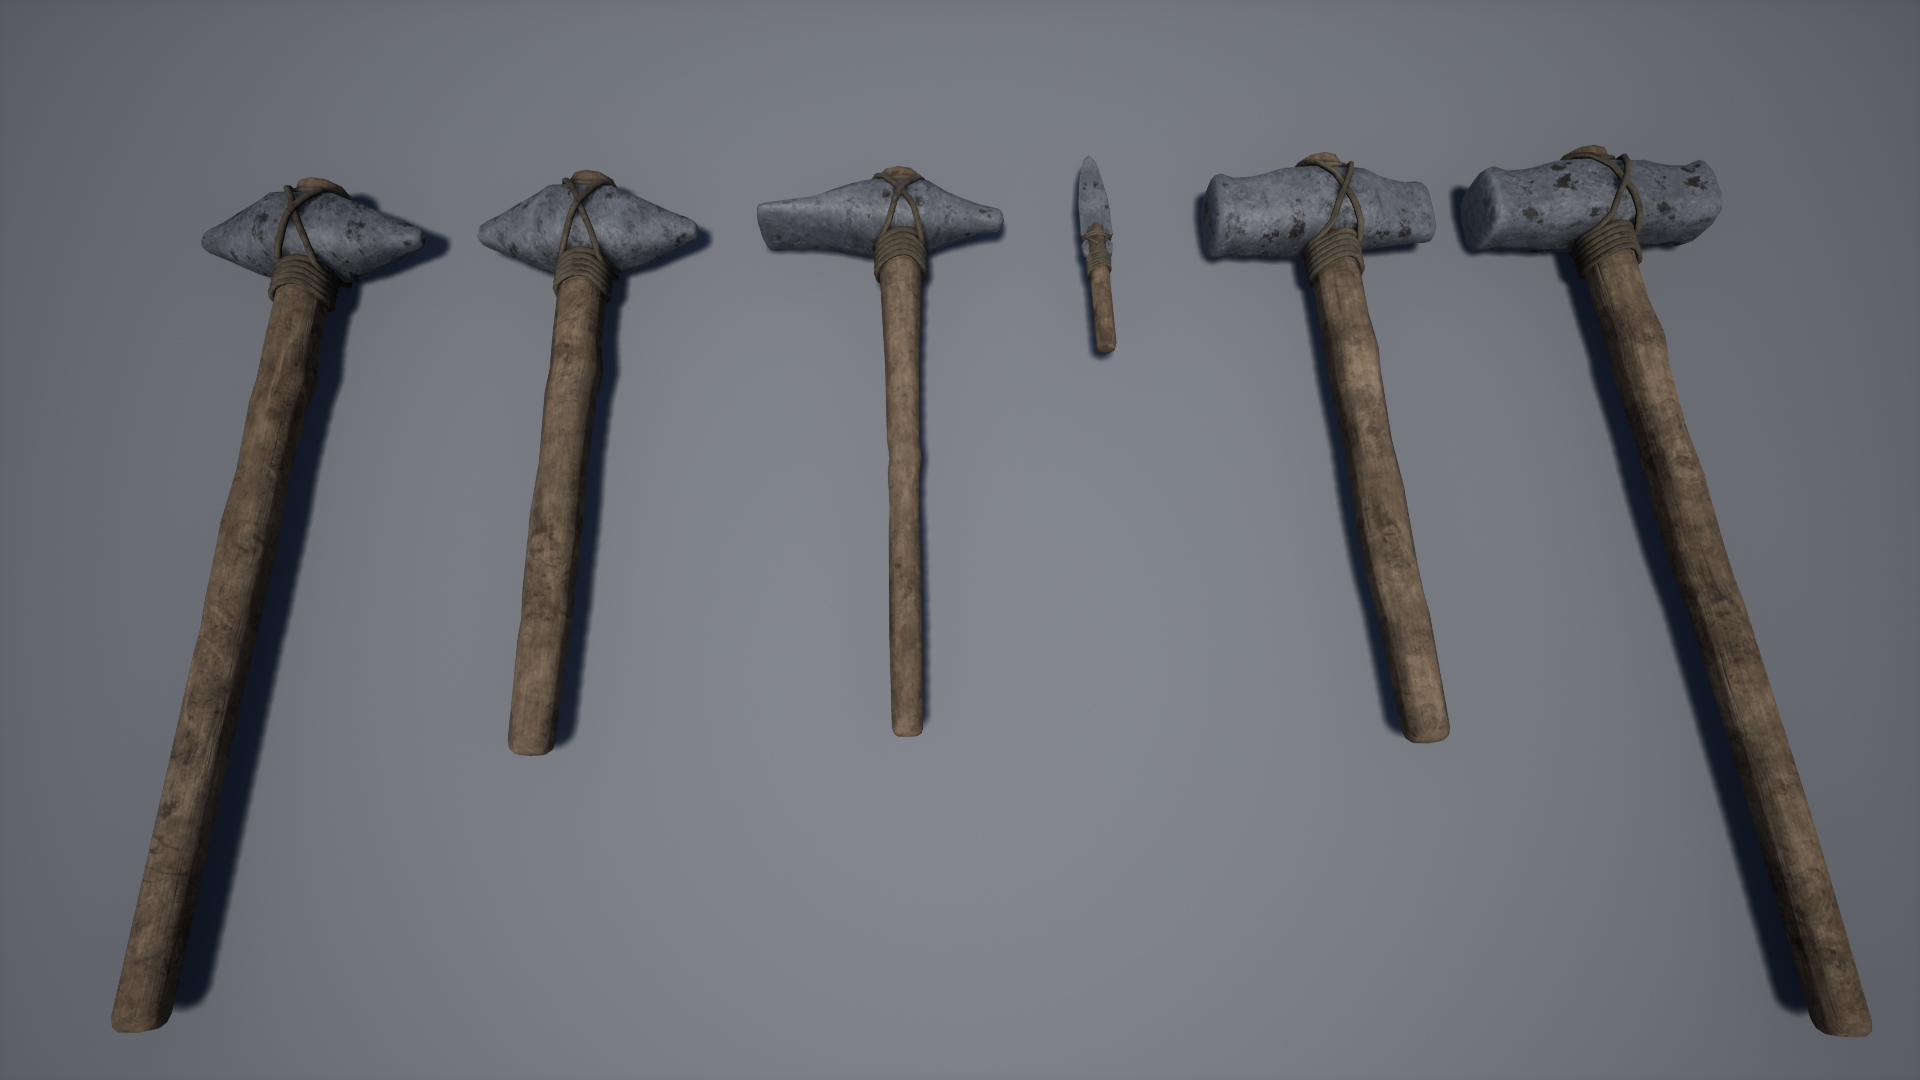 Ancient Tools Pack 2 by SvitchMark in Props - UE4 Marketplace